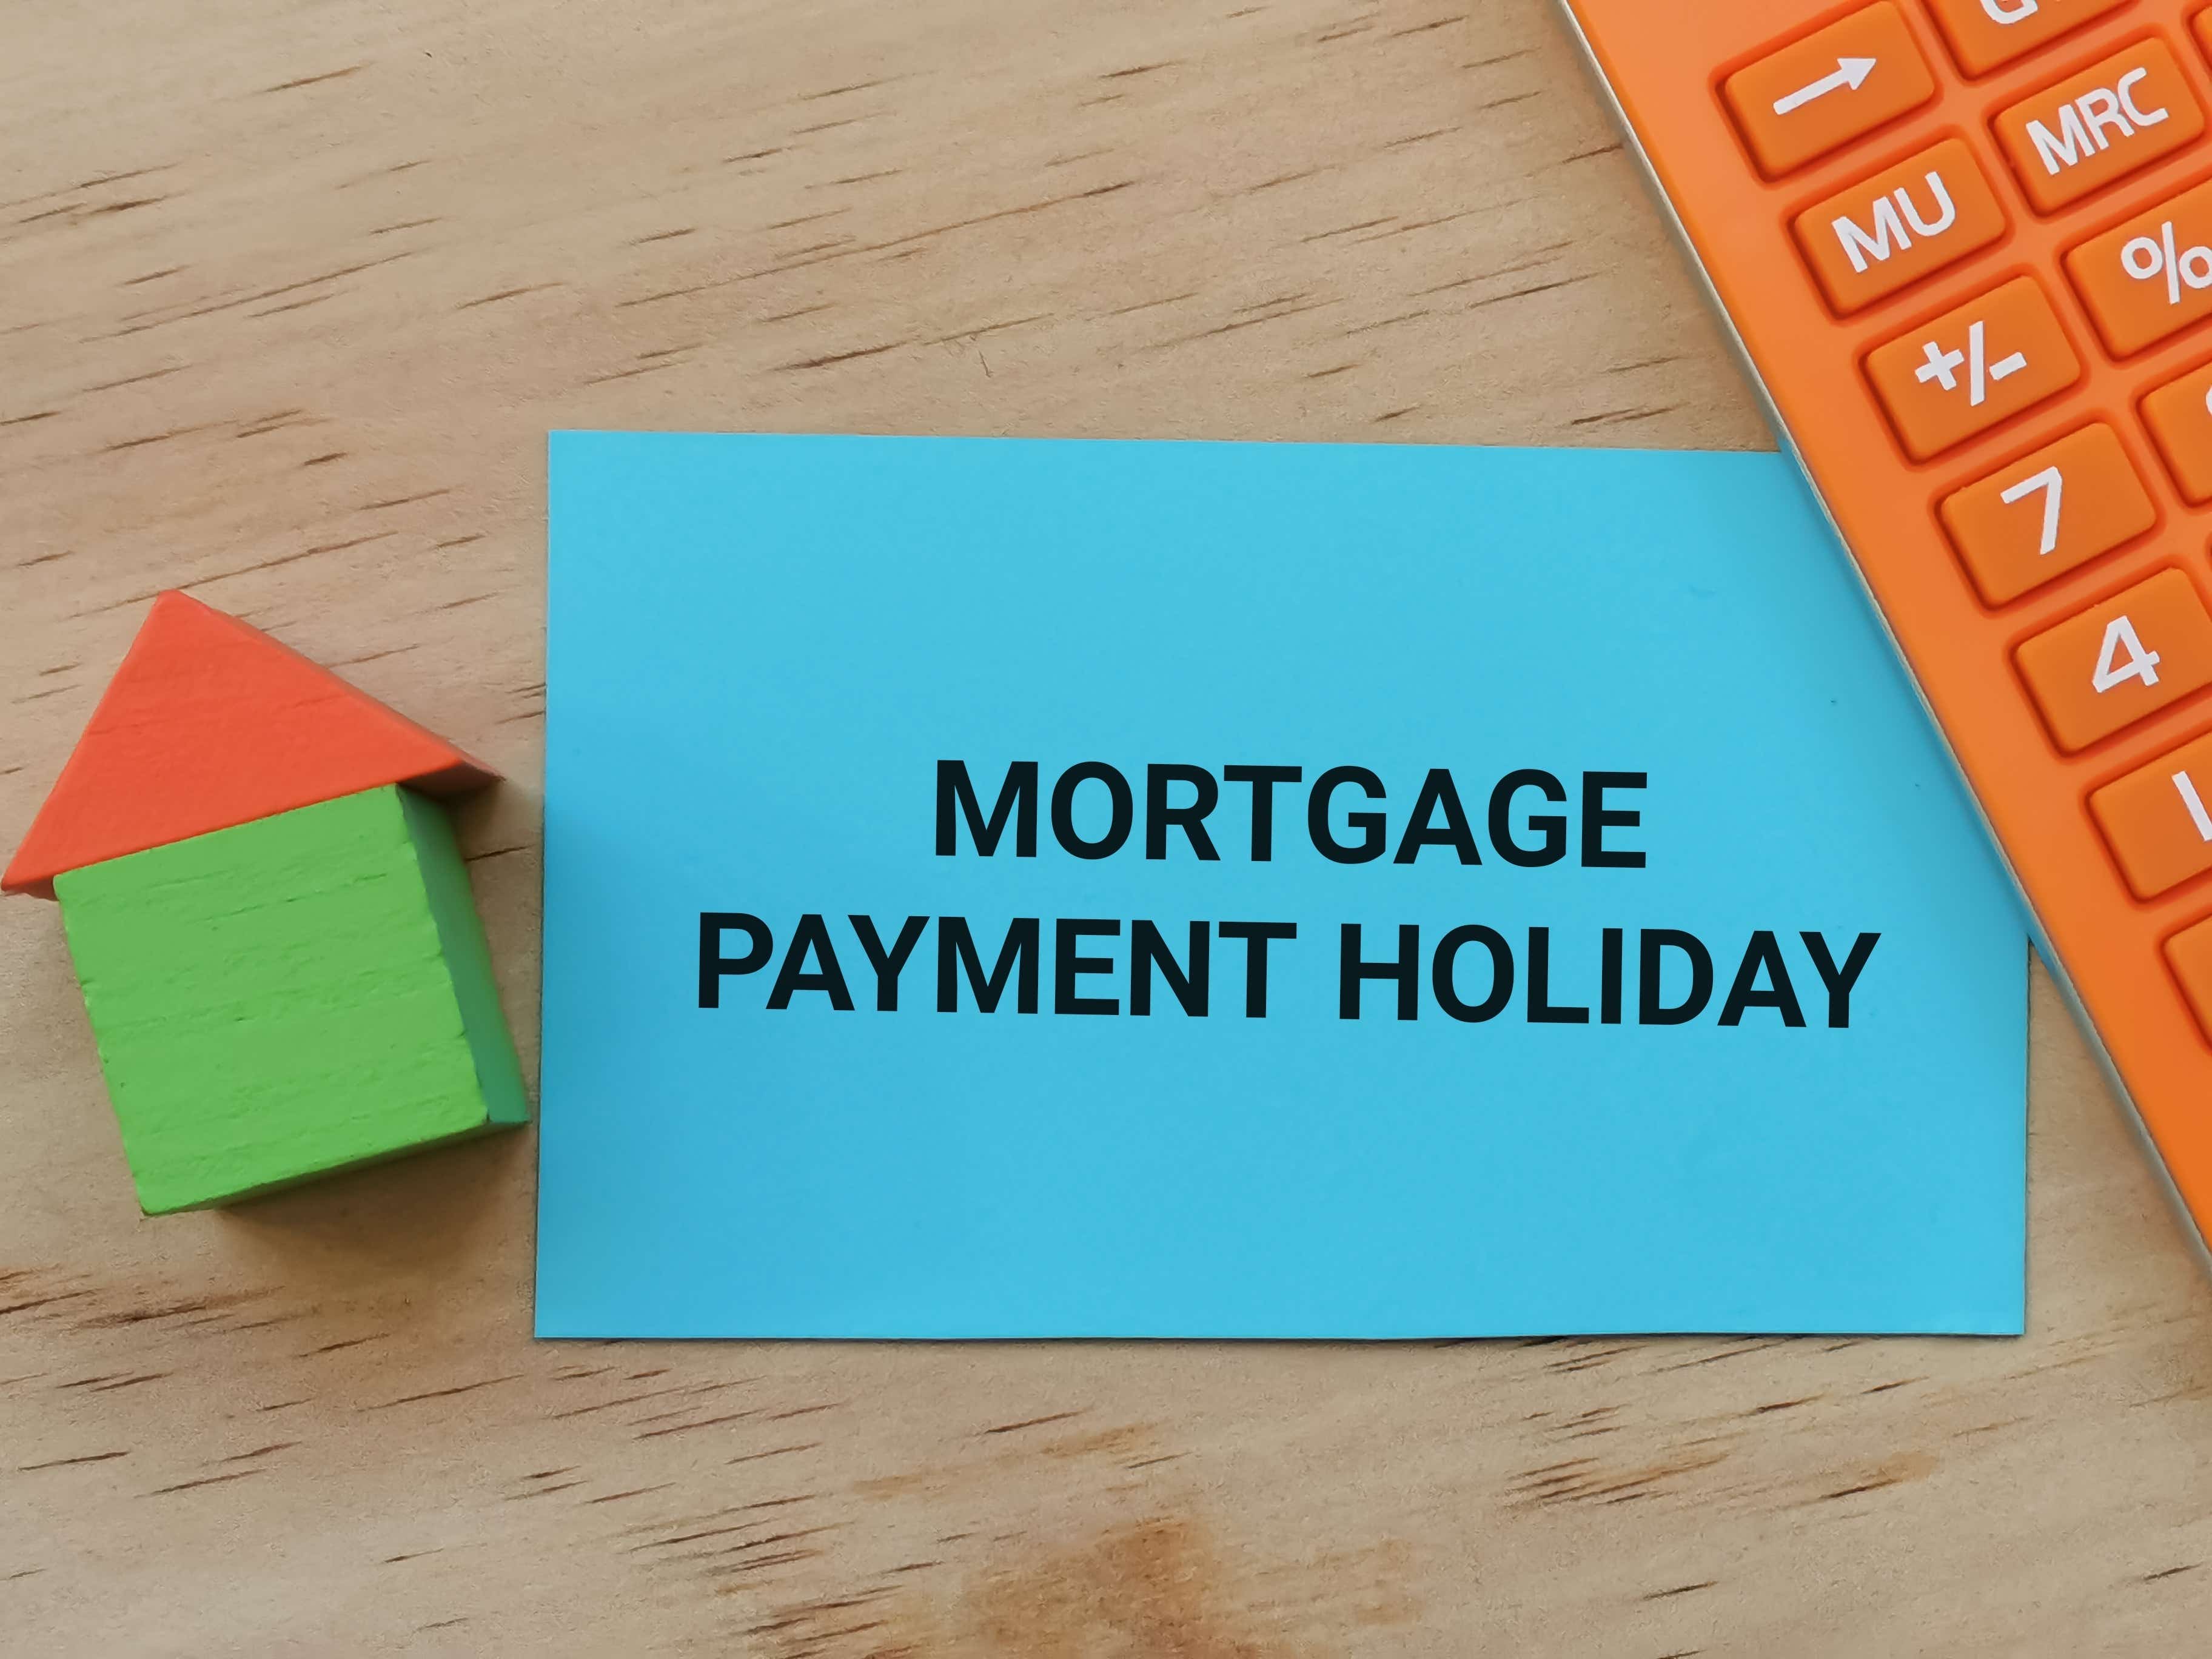 On a wooden desk lays an orange calculator, a small model of a green house with a red roof and a blue card with the words 'mortgage payment holiday' in bold print.